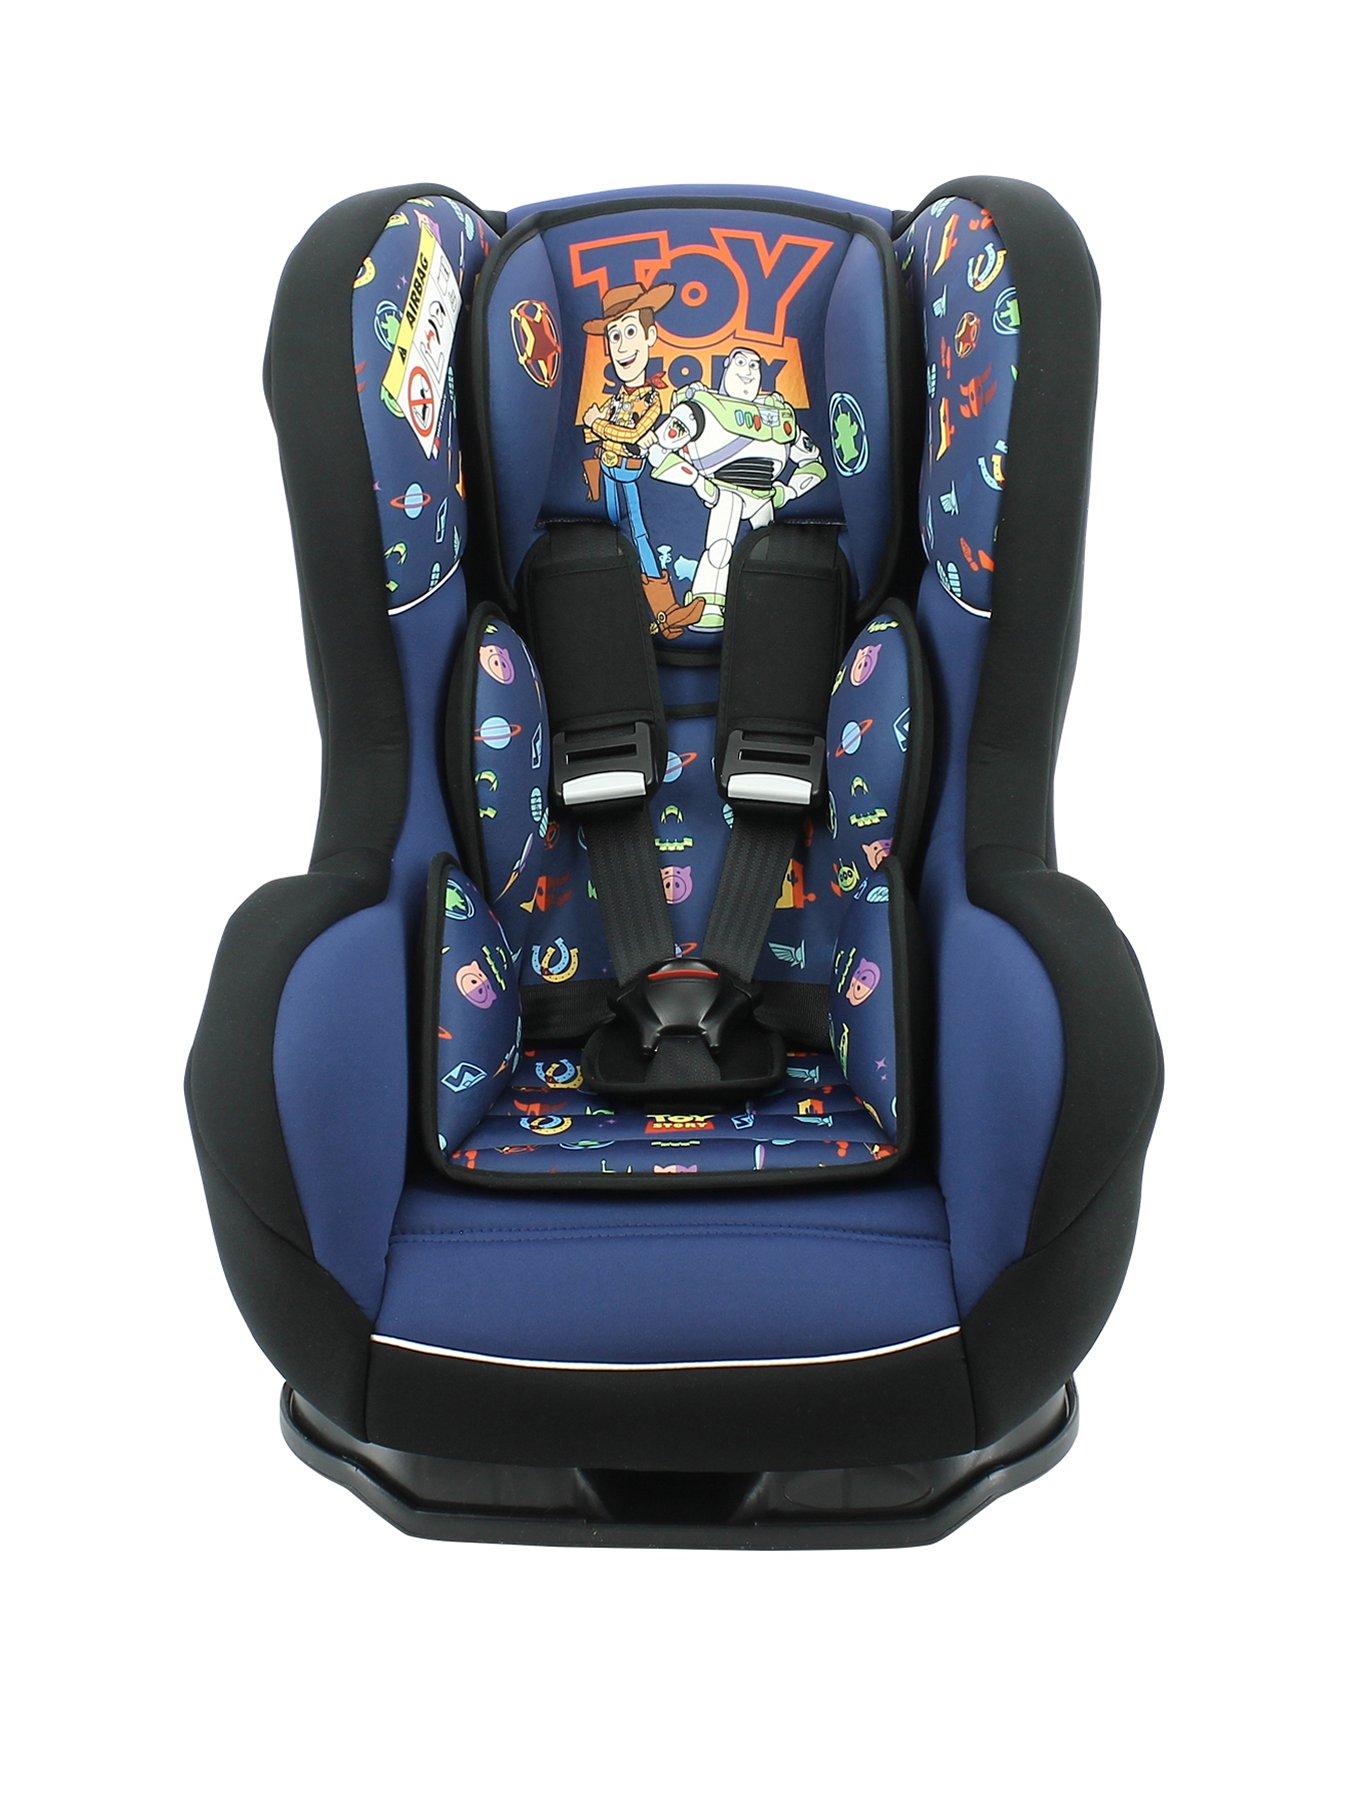 toy story car seat